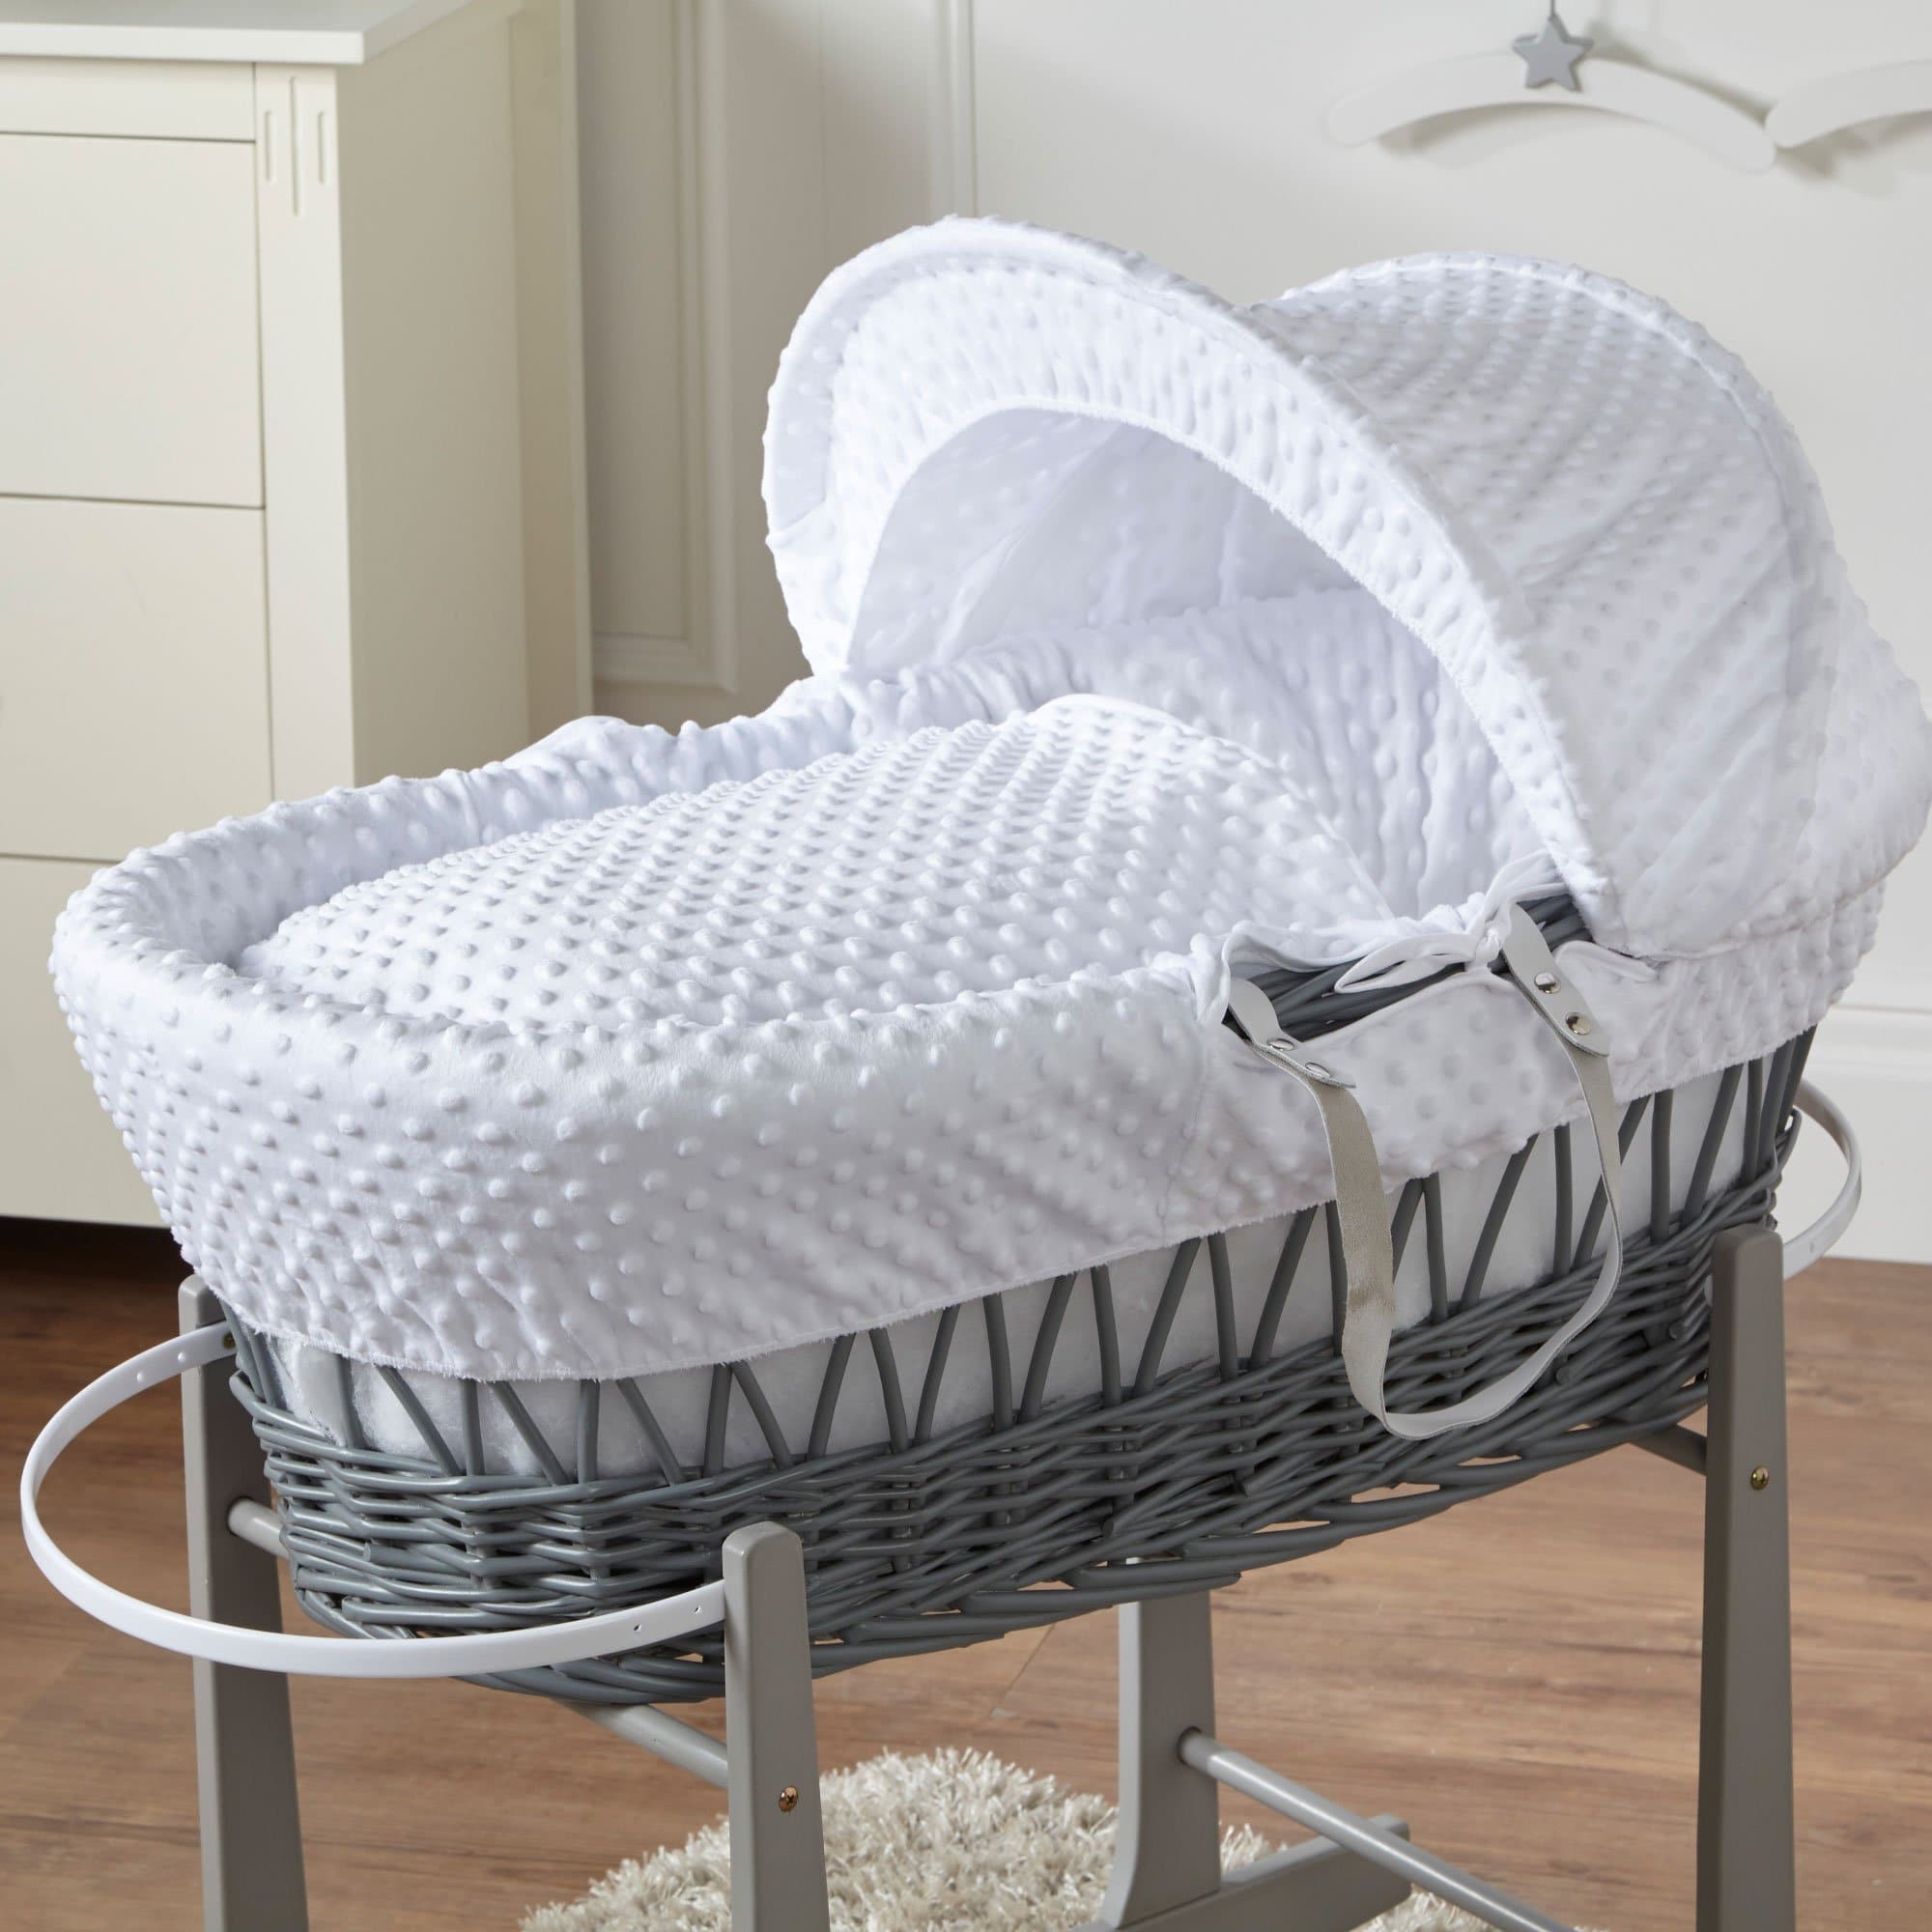 Wicker Moses Basket - For Your Little One